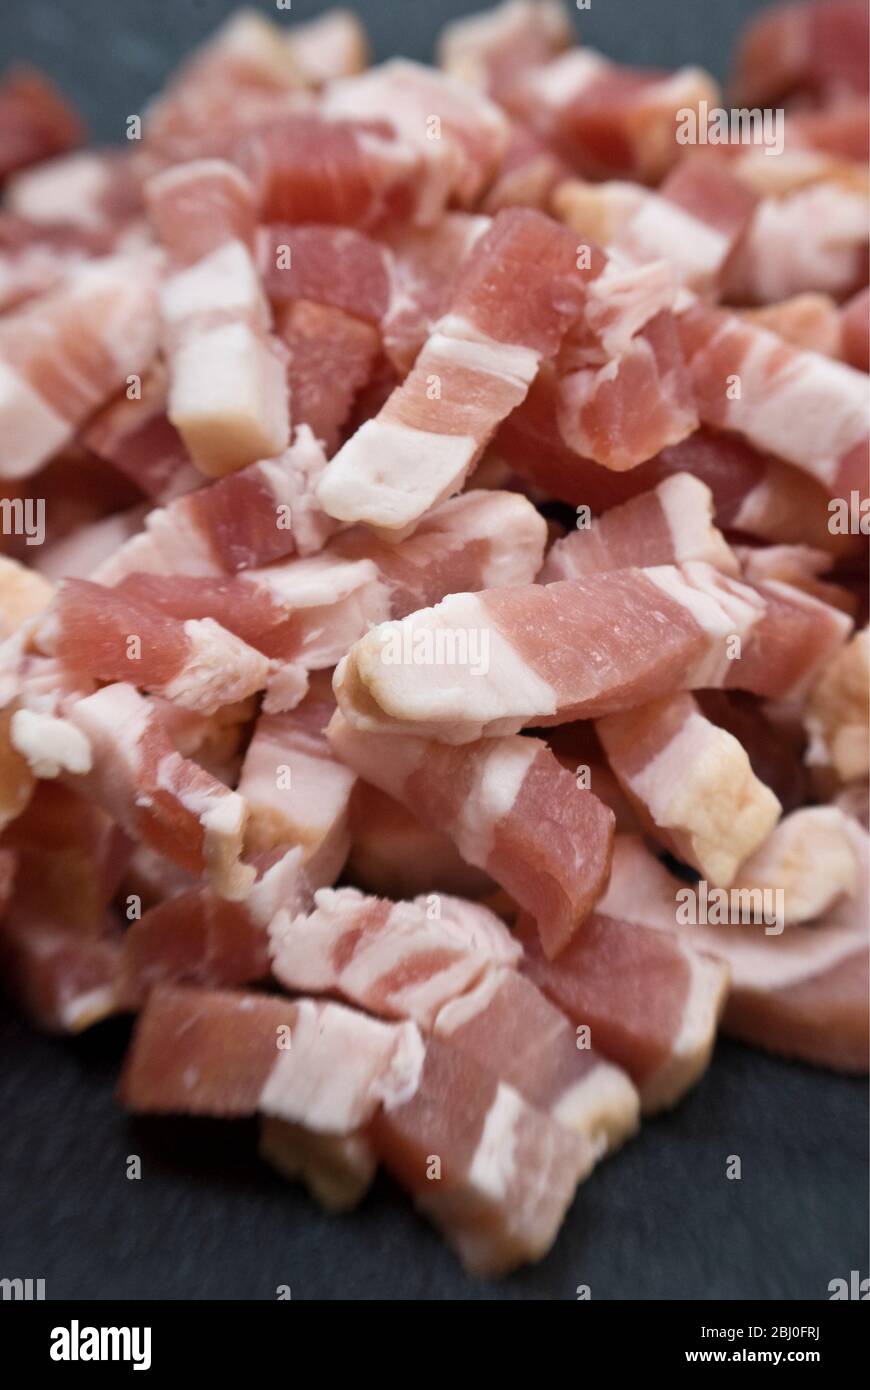 Chopped pieces of streaky bacon known as pancetta in Italy and lardons in France - Stock Photo